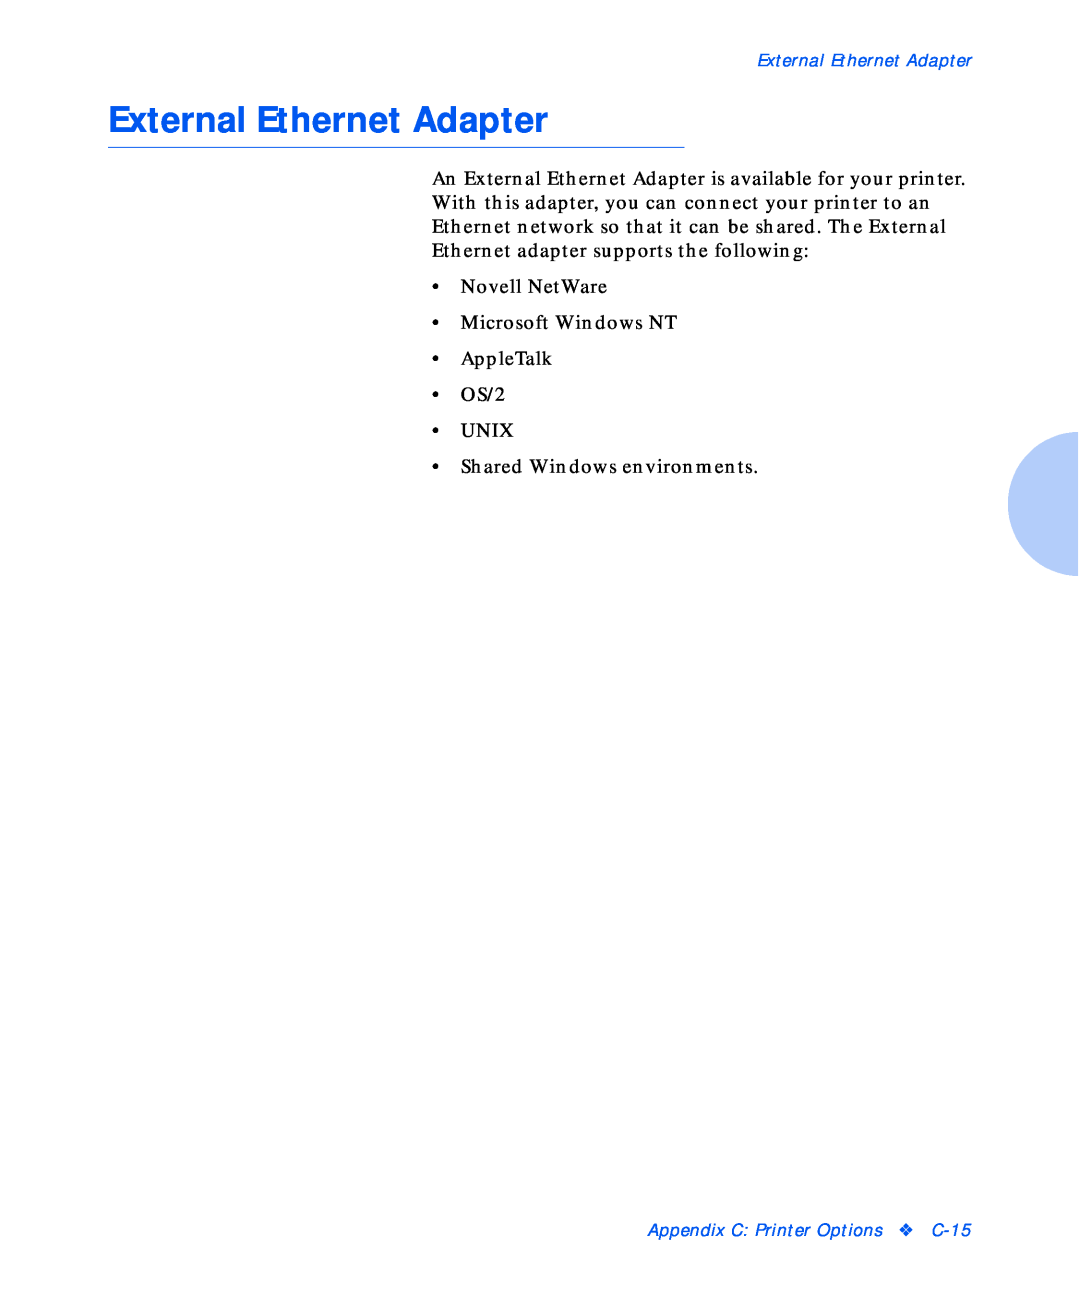 Xerox NC20 manual An External Ethernet Adapter is available for your printer, Appendix C Printer Options C-15 